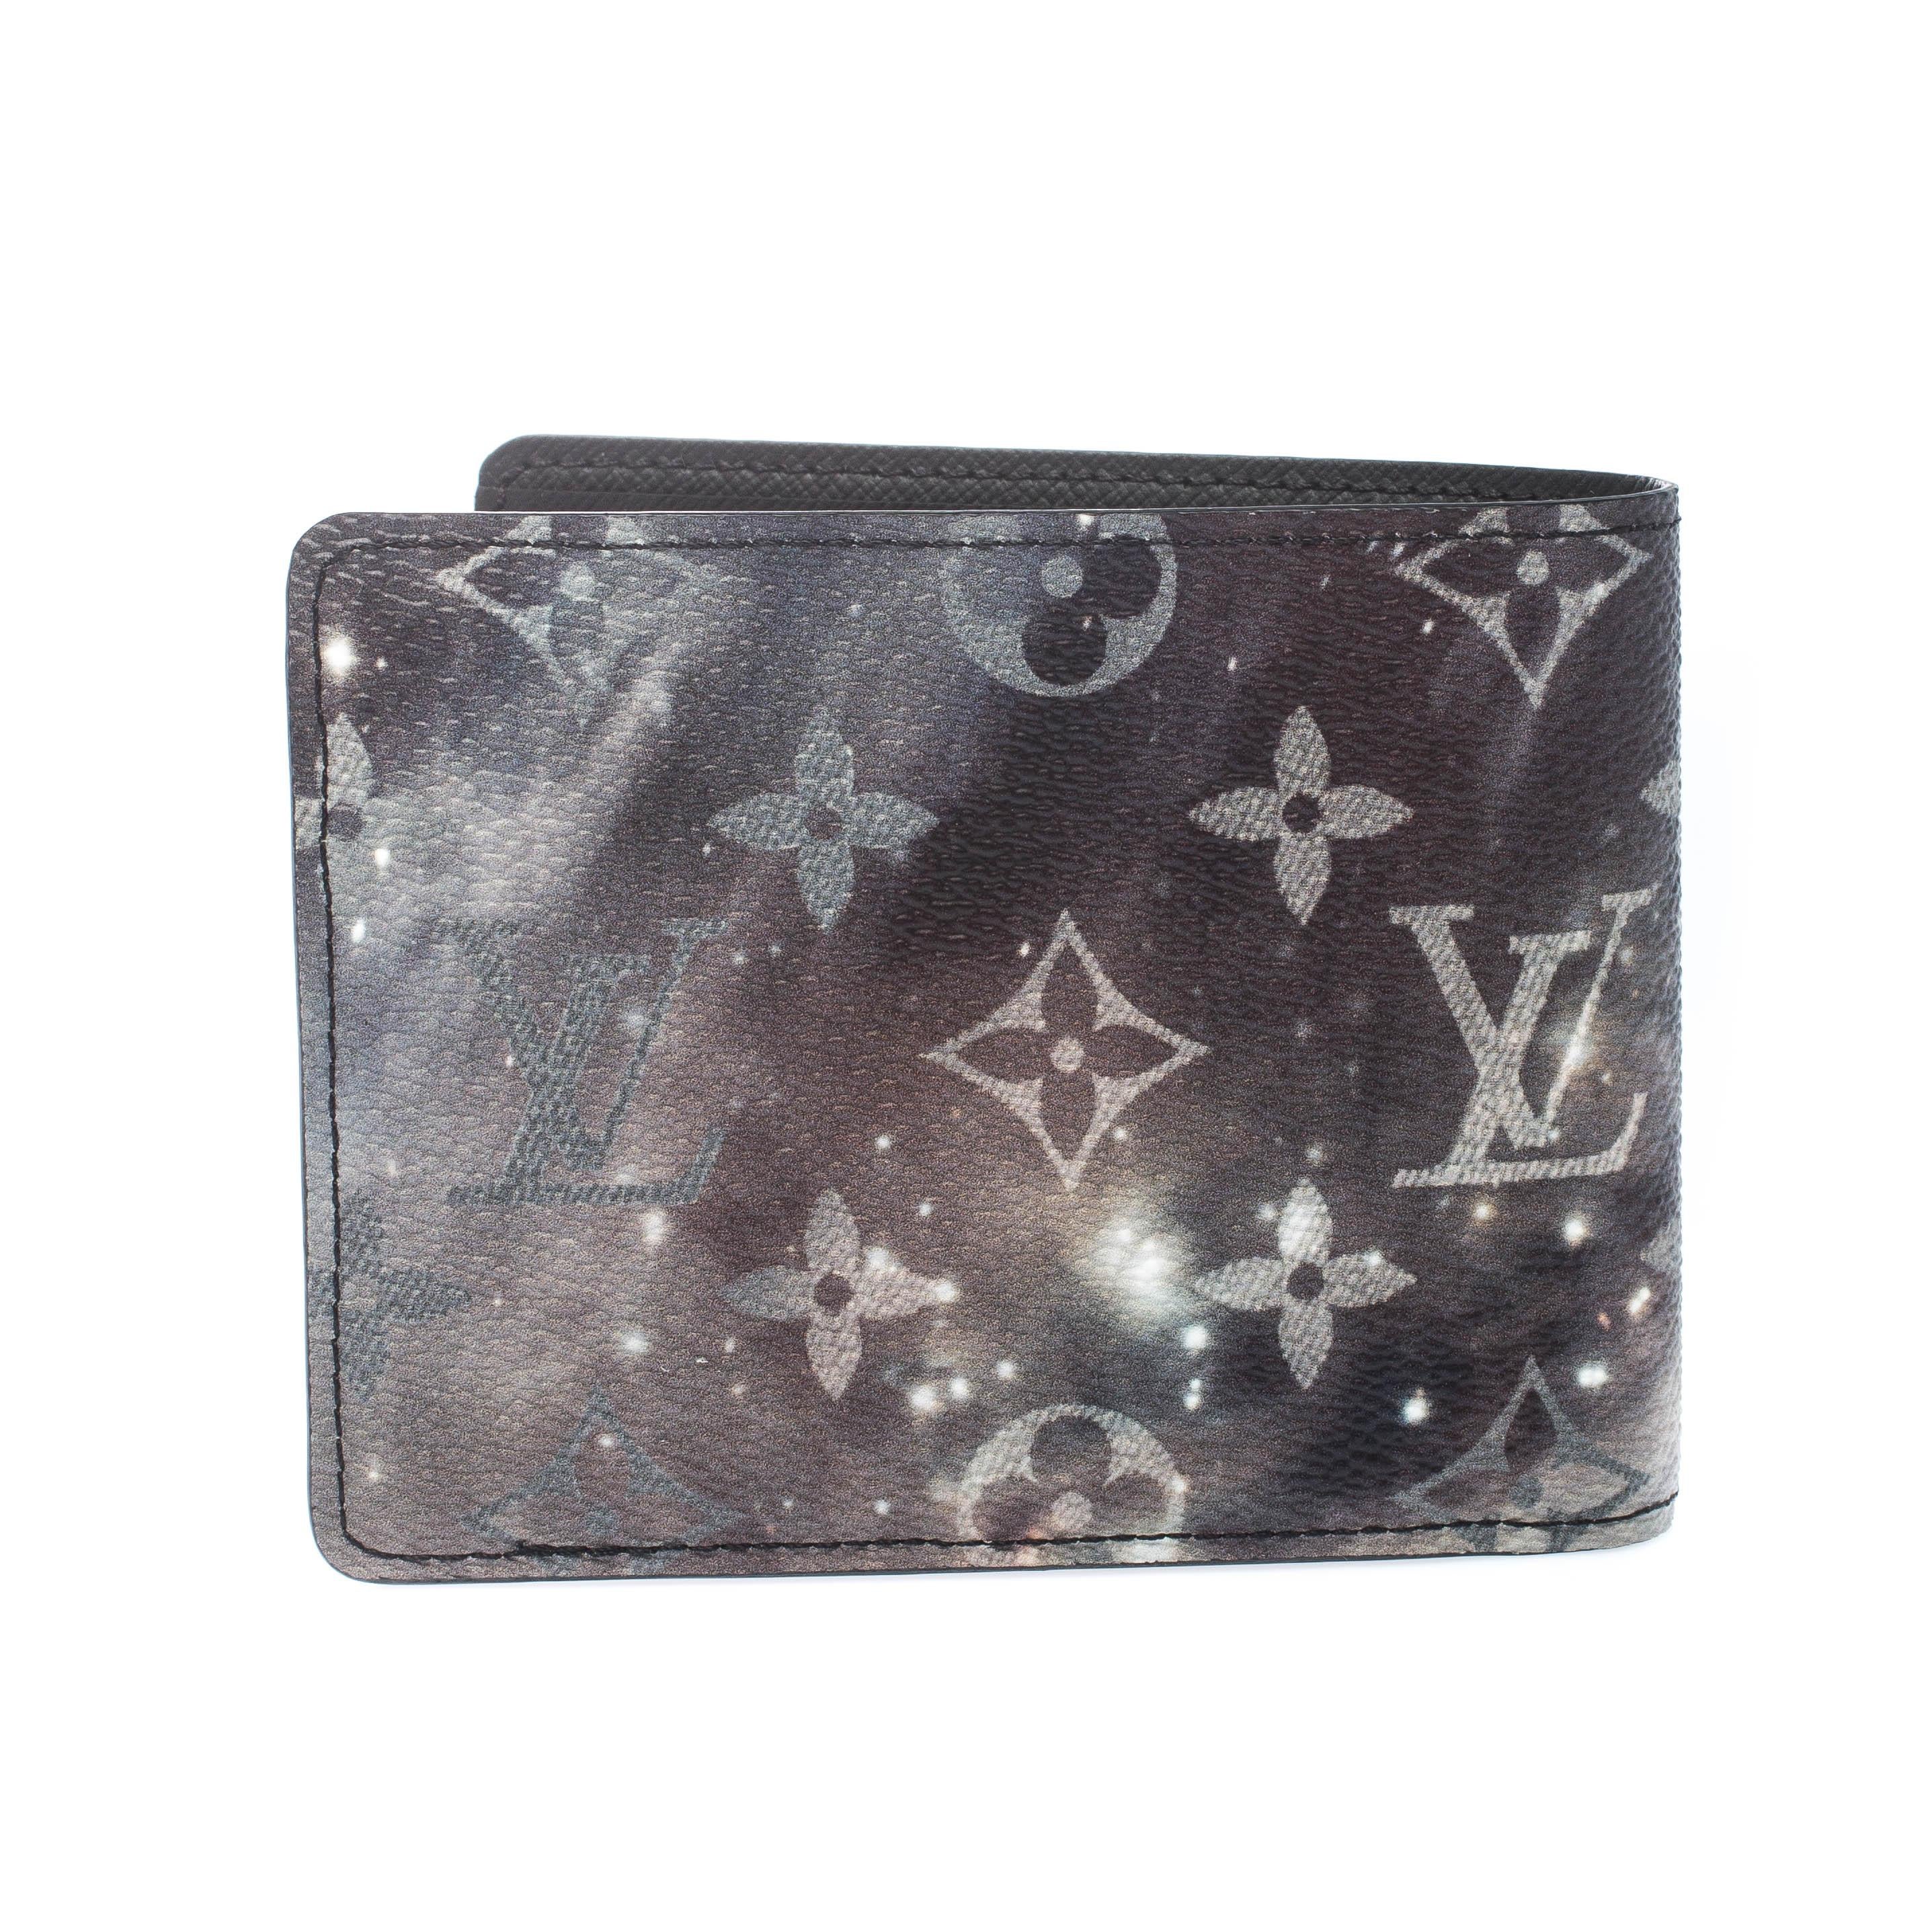 A splendid piece from Louis Vuitton, this wallet is an astounding creation and a worthy-investment for men who like blending fashion with art. This wallet is designed in a bi-fold style, carrying an elegant appeal and a sleek silhouette. It is